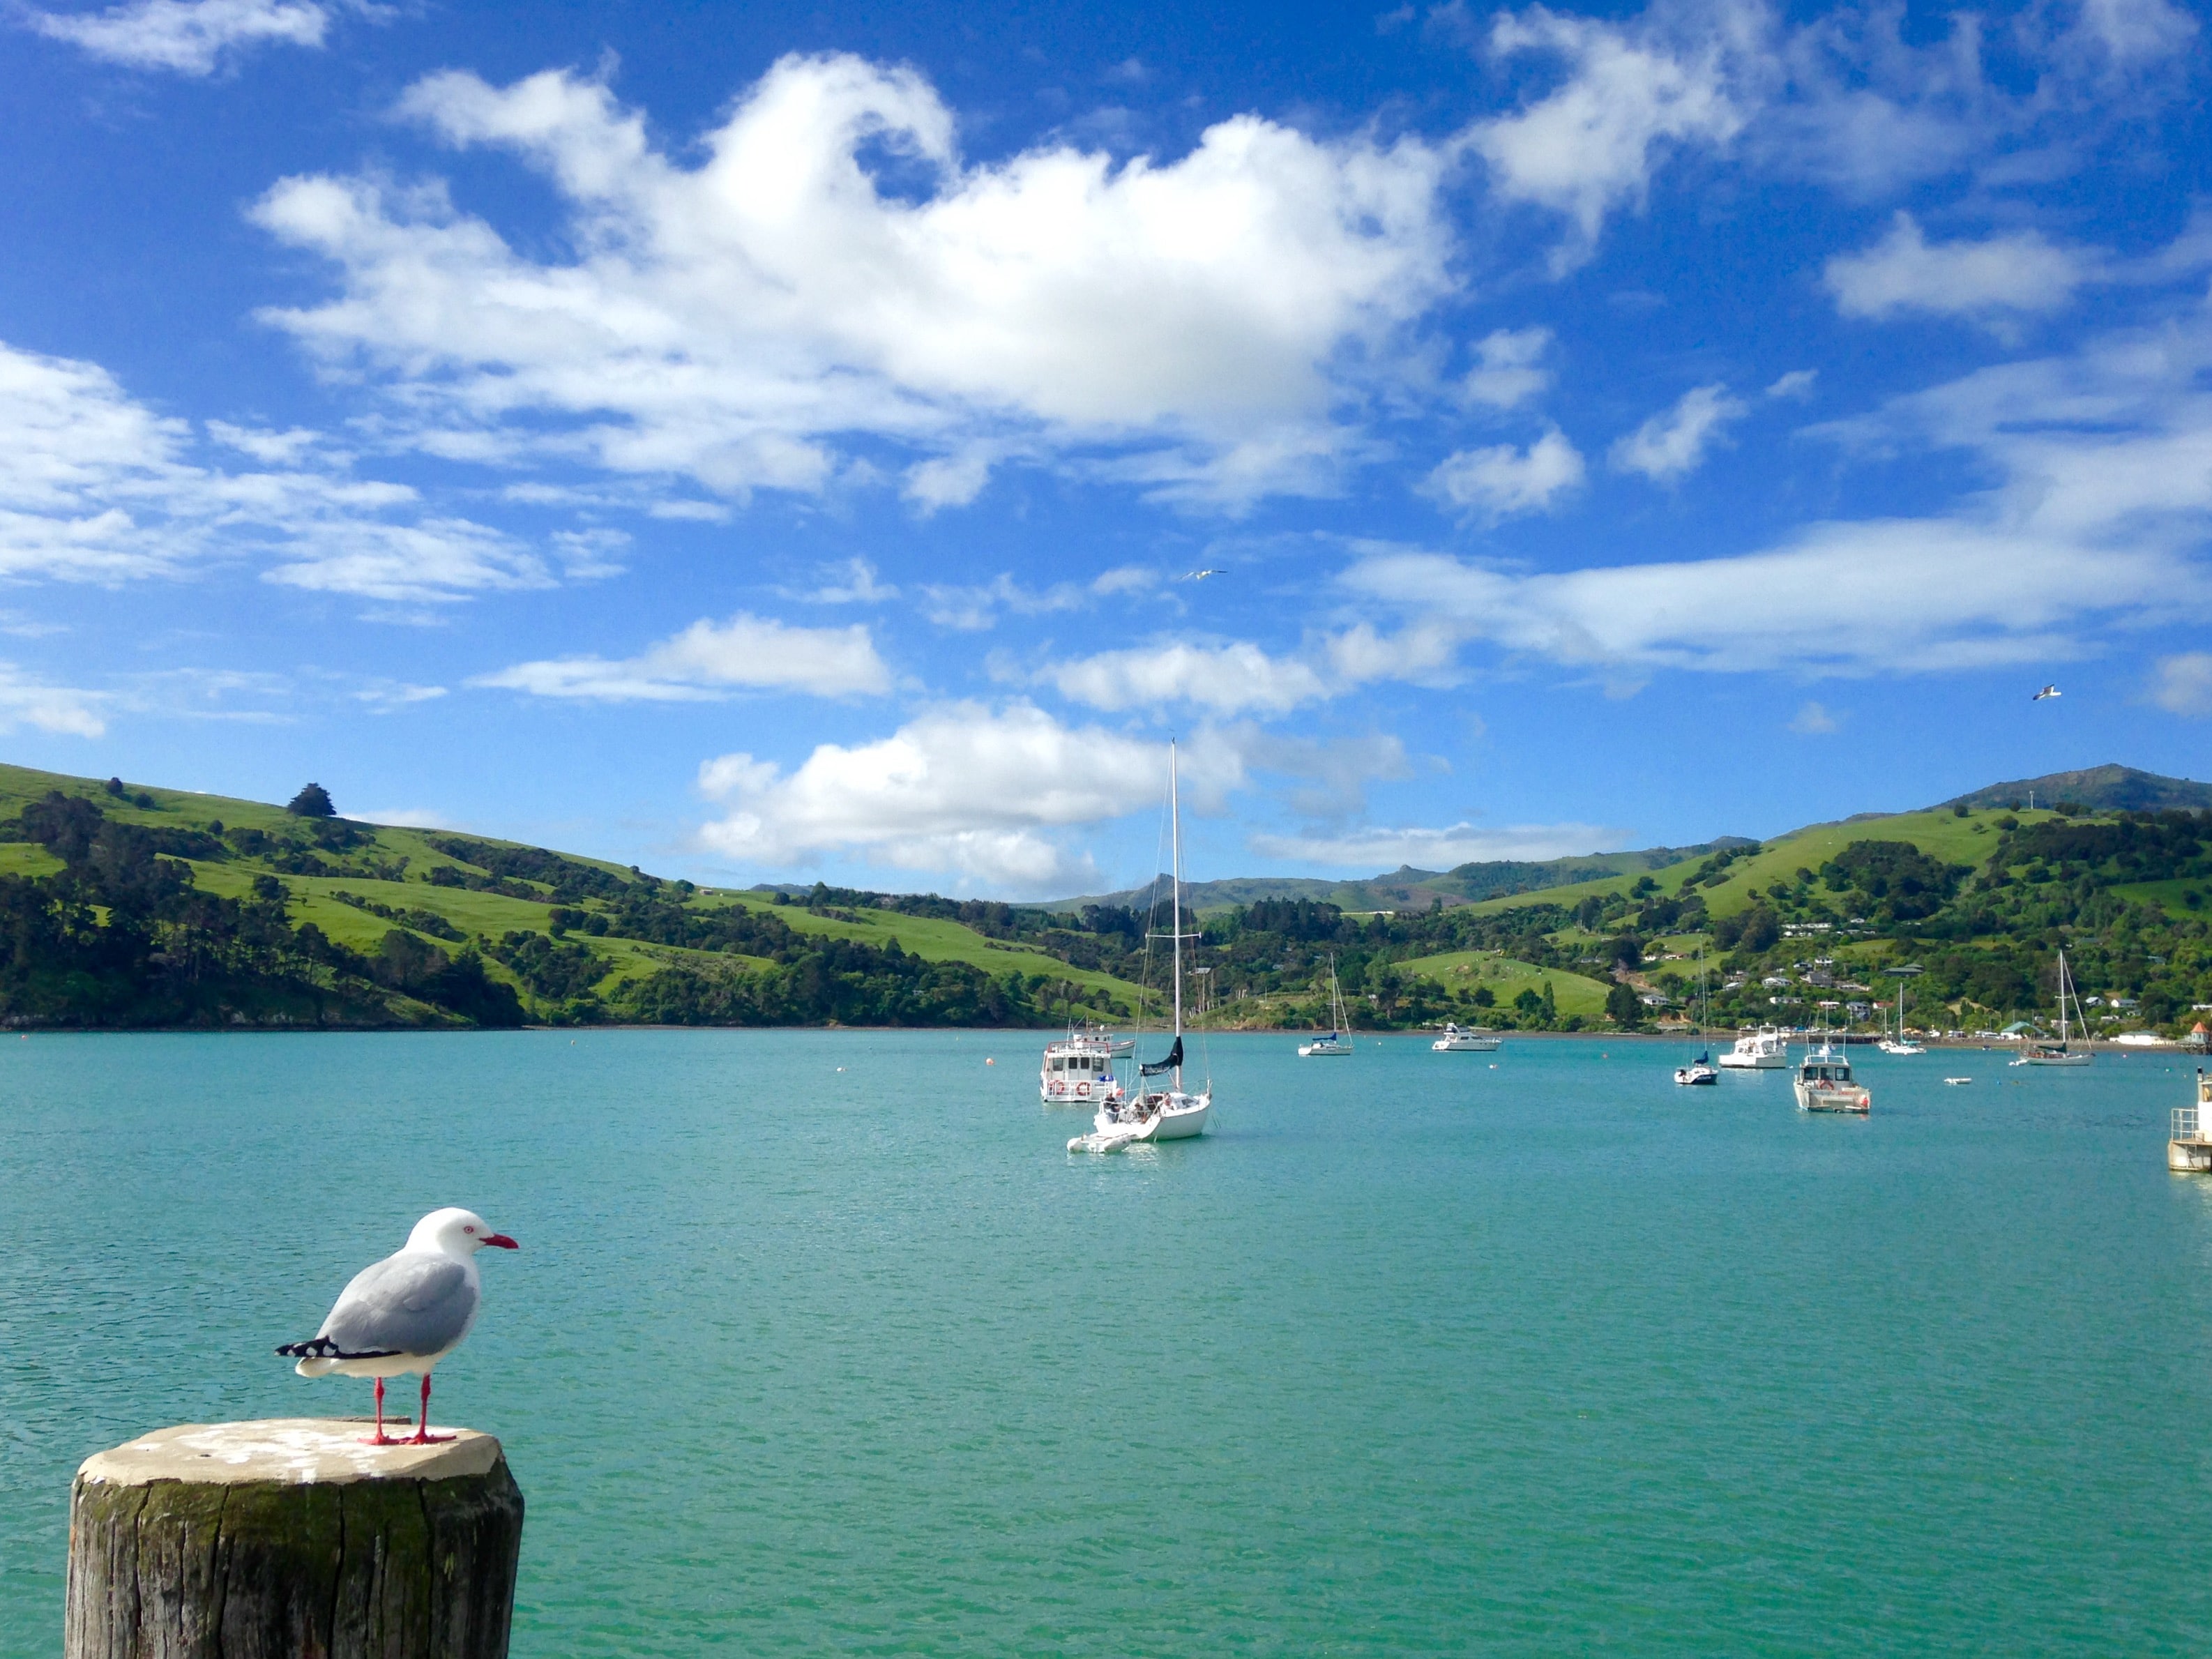 A seagull perched looks out at the boats on Akaroa Harbour